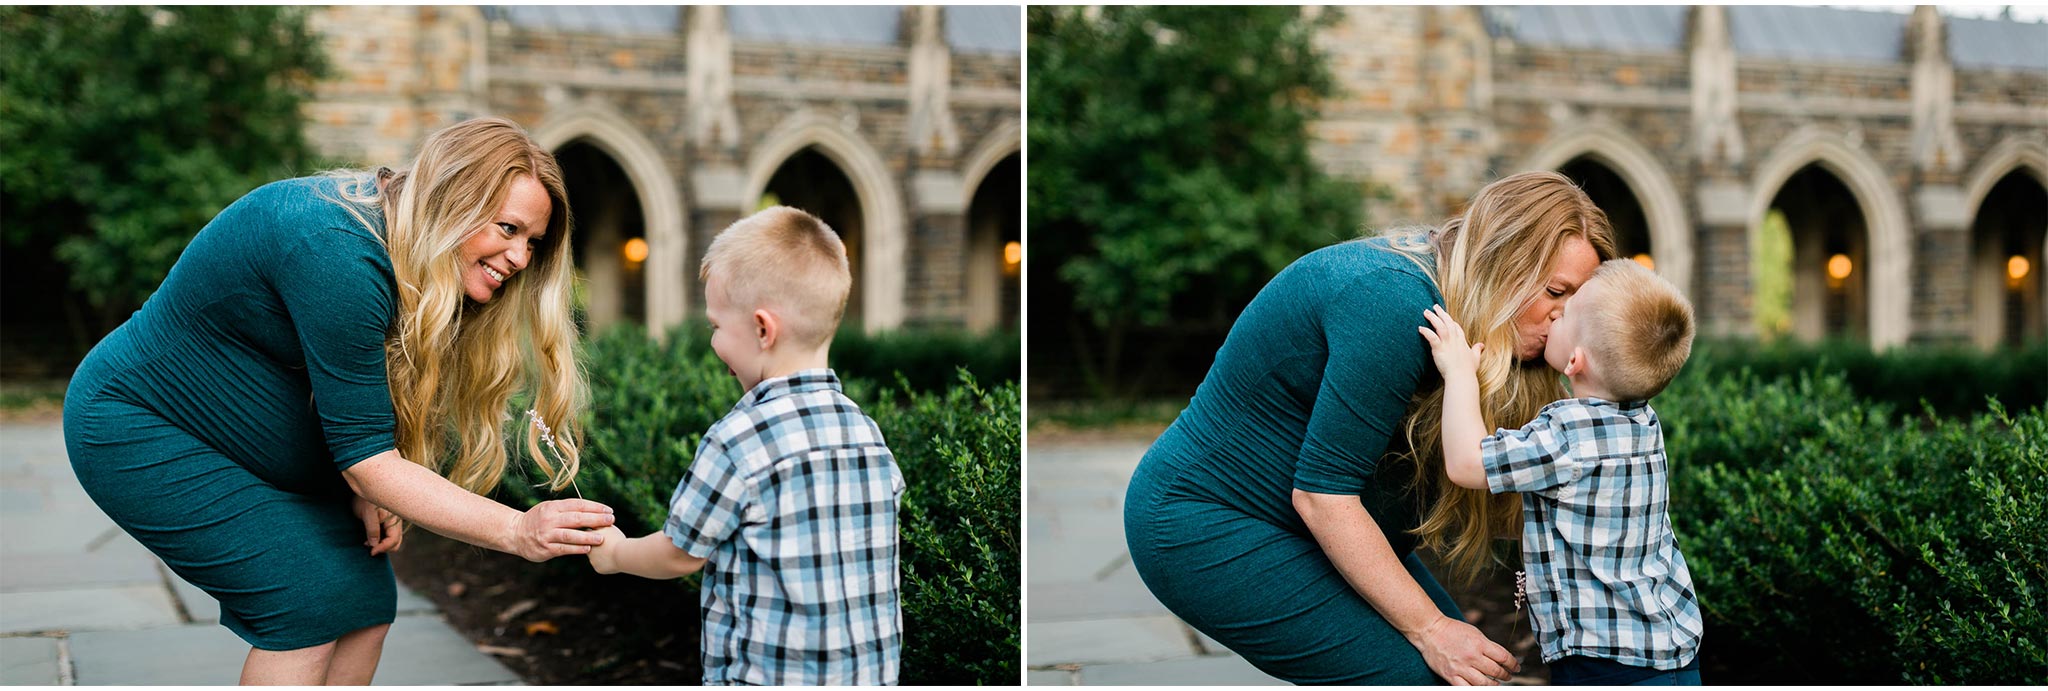 Young boy handing flower to mom | Durham Maternity Photographer | By G. Lin Photography